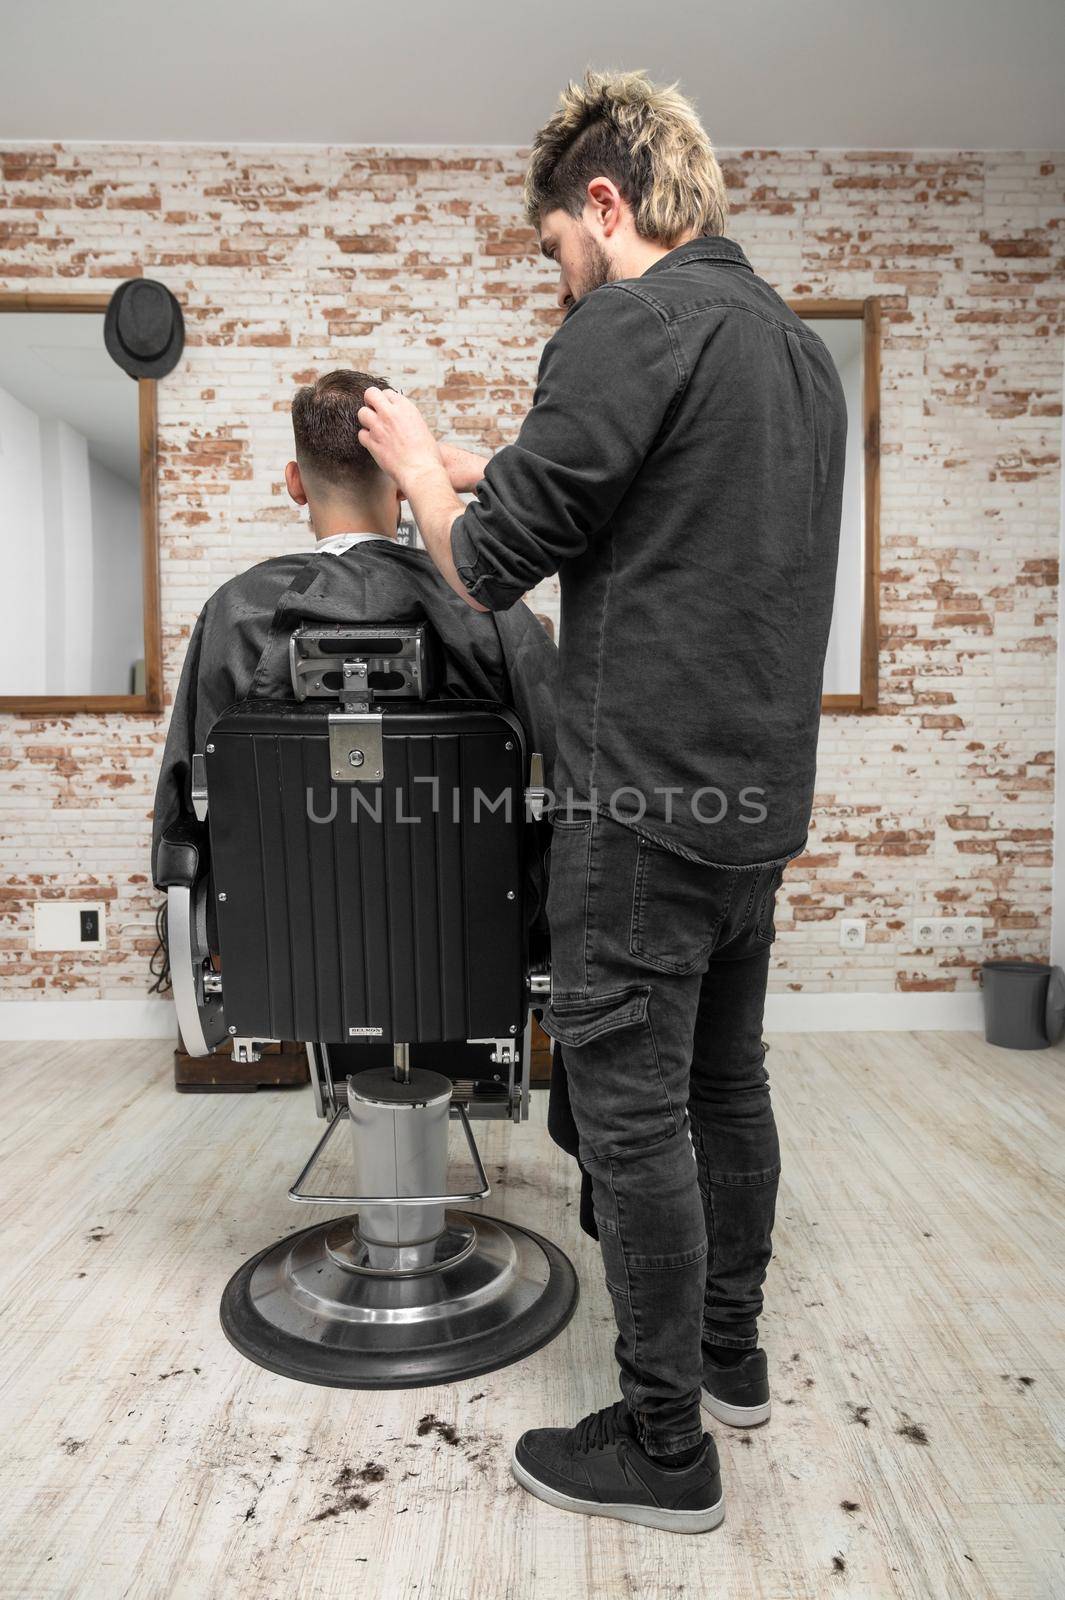 Work at the barber shop. High quality photo